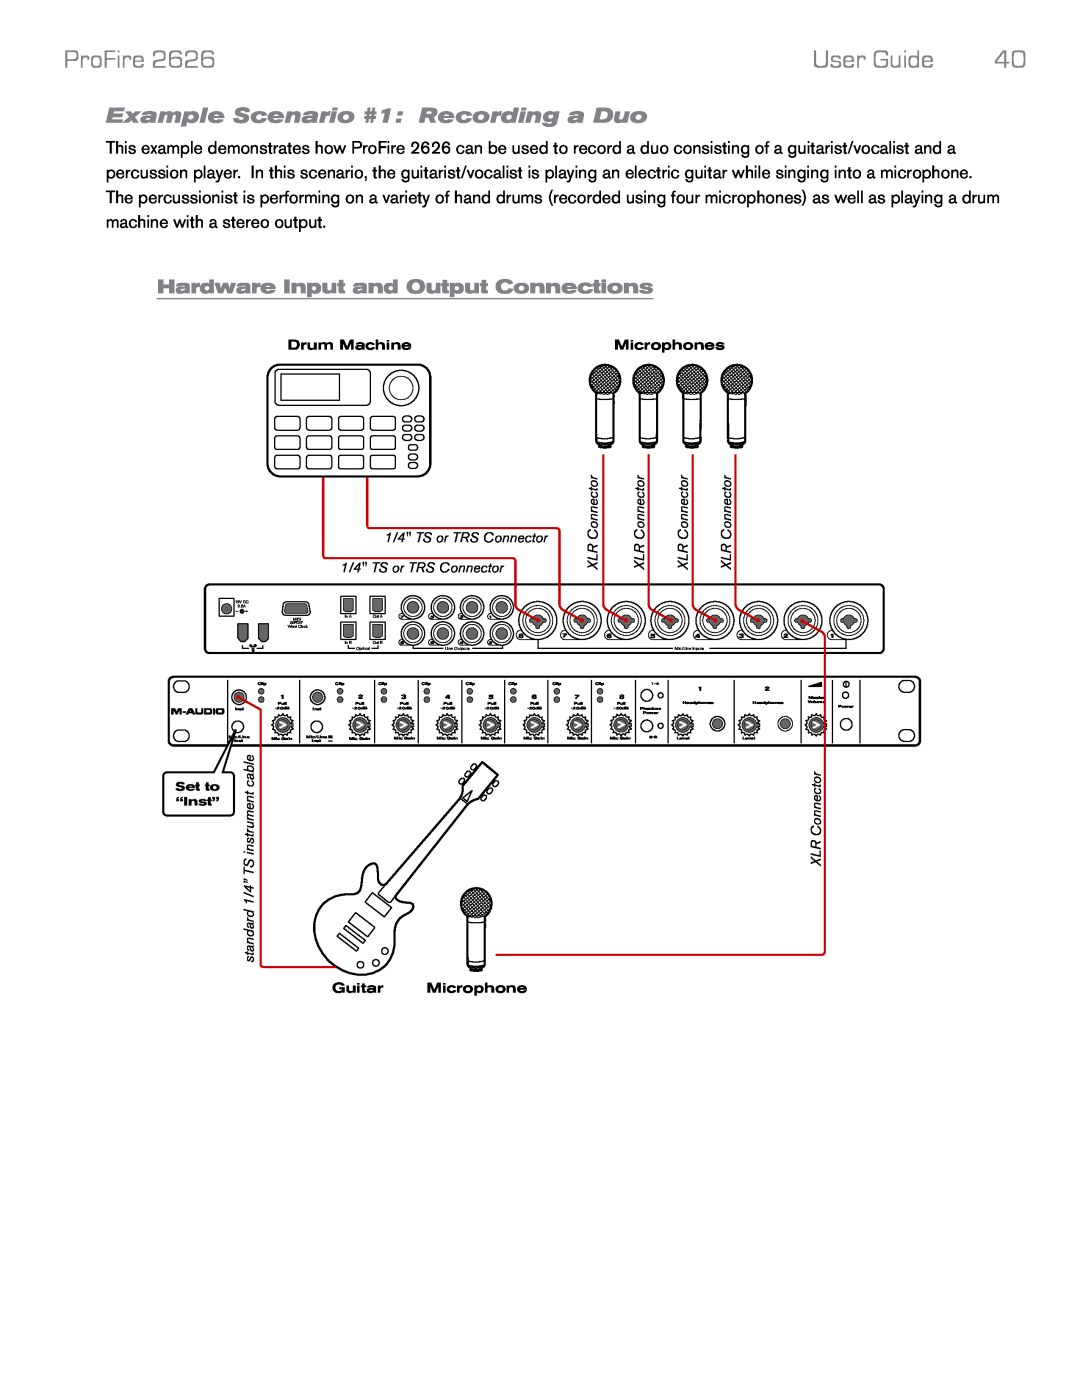 M-Audio 2626 manual Example Scenario #1: Recording a Duo, Hardware Input and Output Connections, ProFire, User Guide 